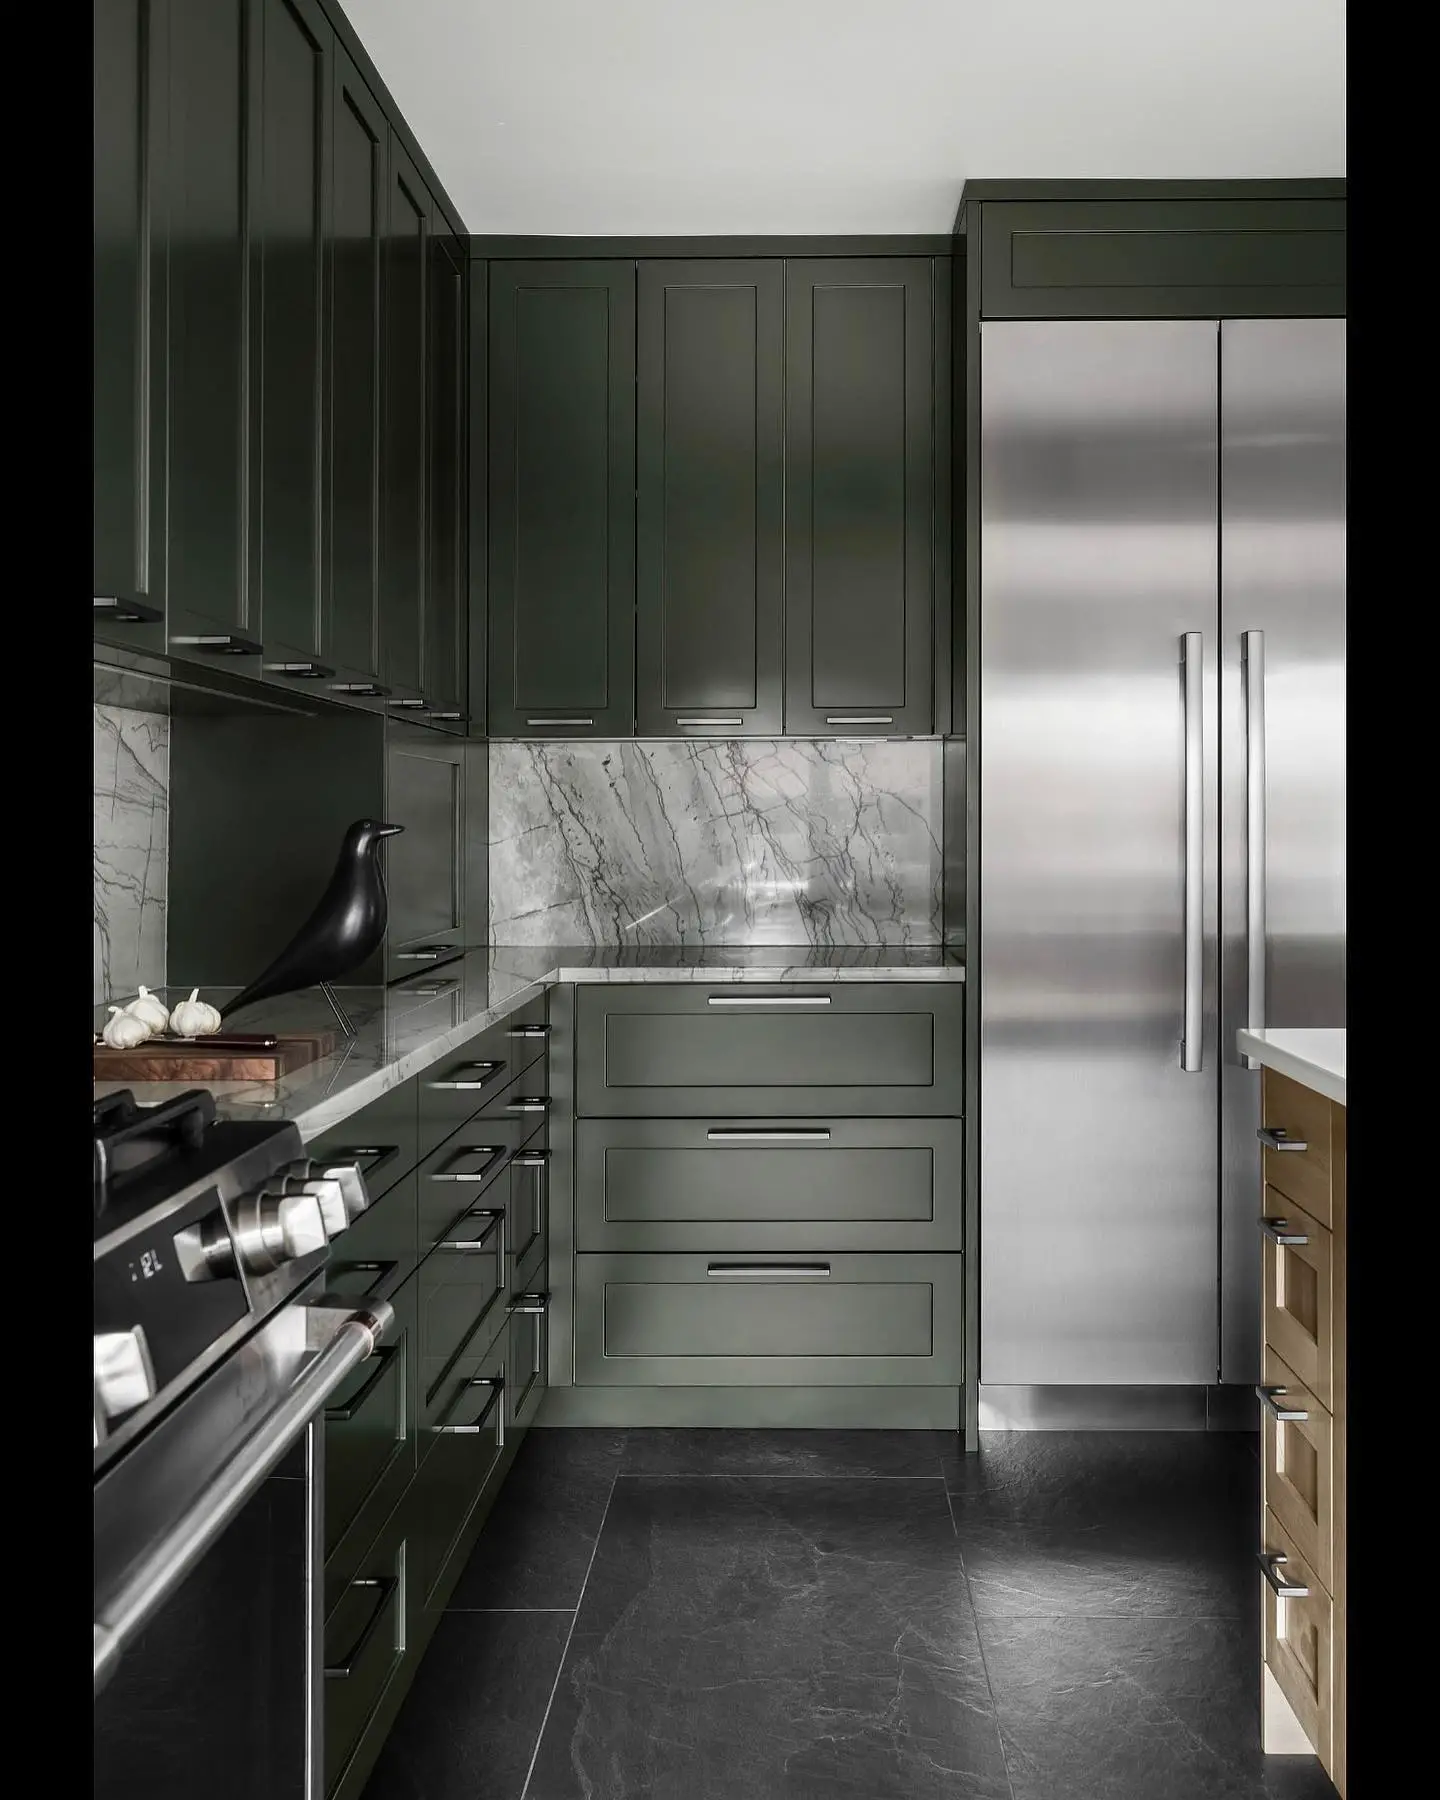 A kitchen with green cabinets and stainless steel appliances has a black kitchen floor.